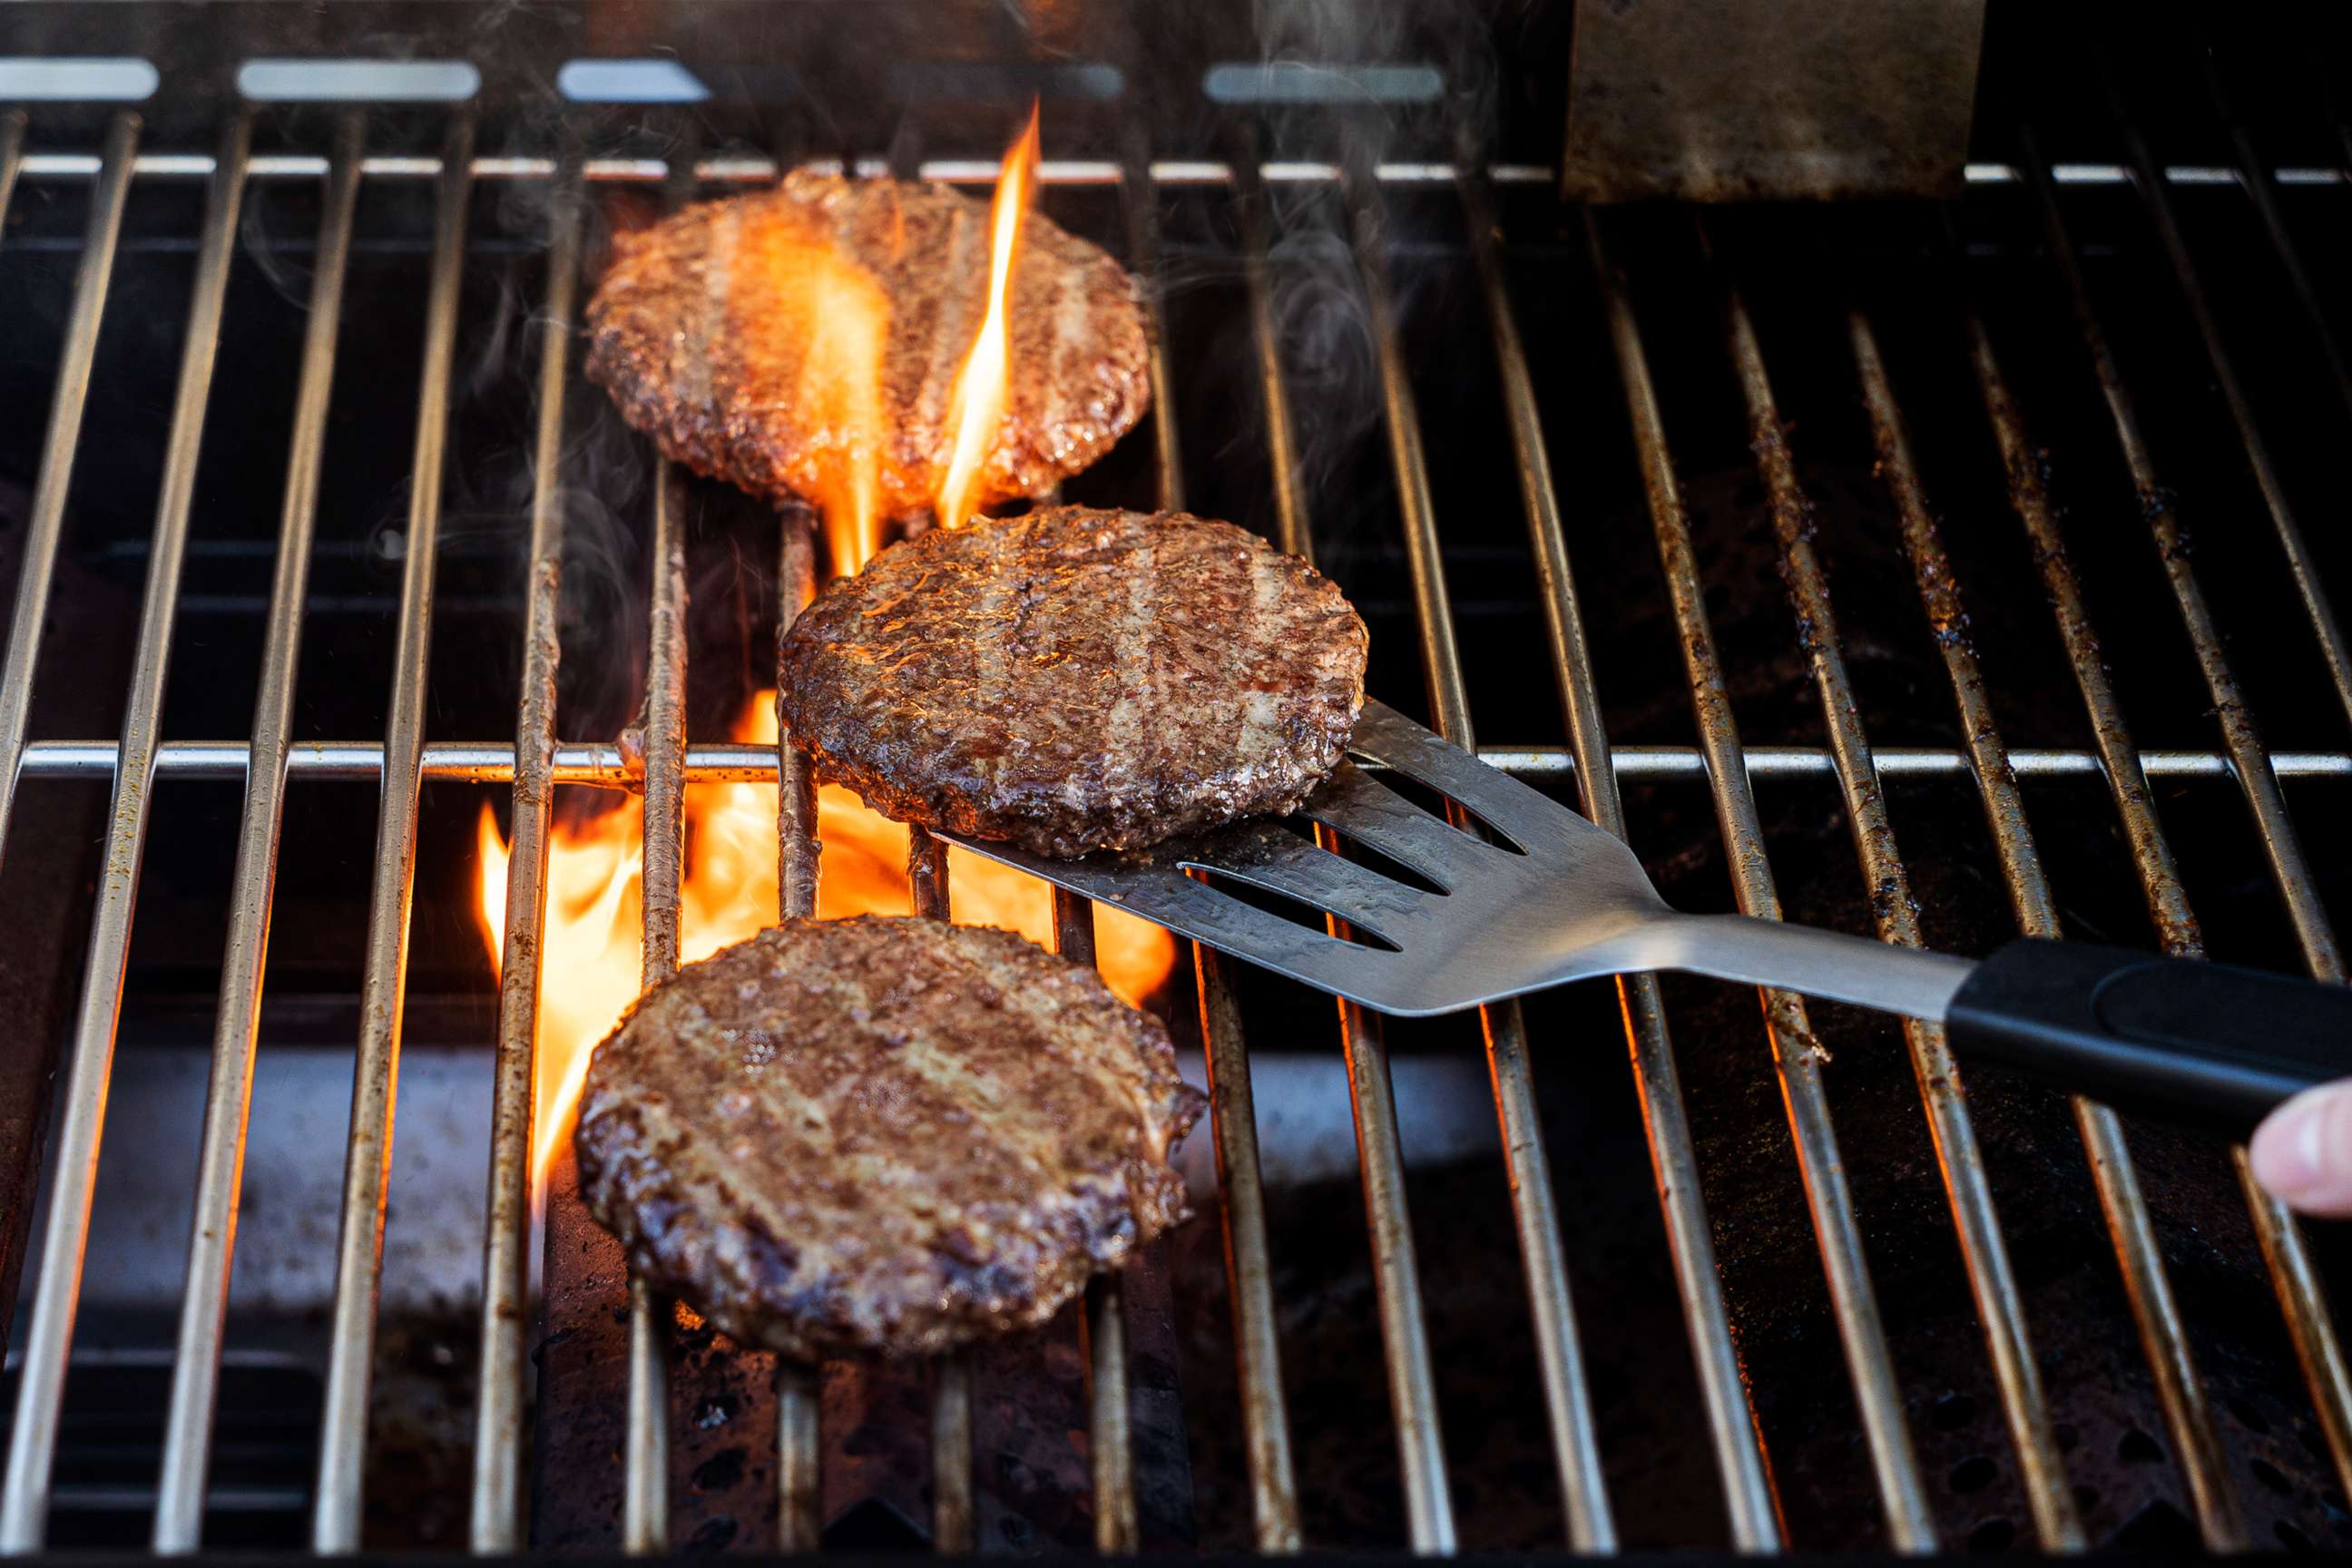 PHOTO: Burgers cooking on a barbecue grill.